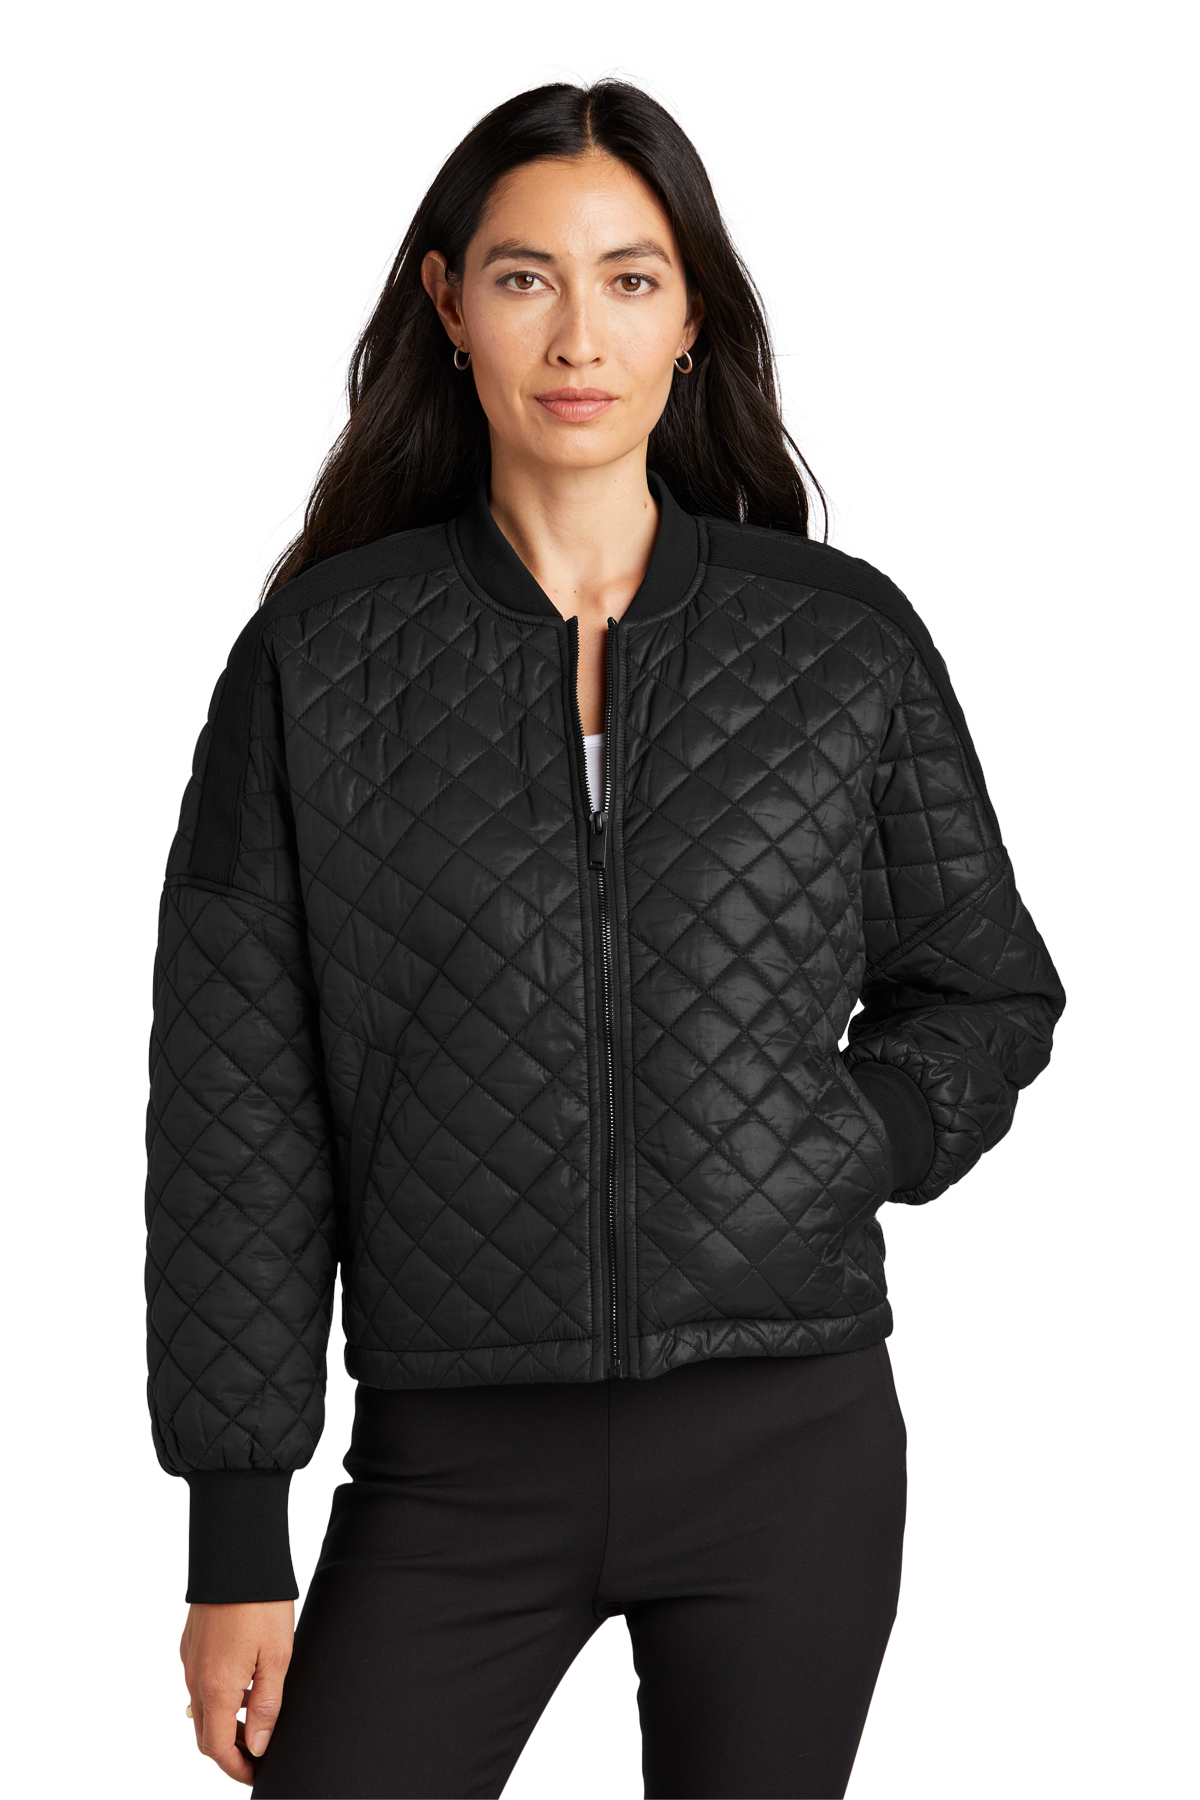 Mercer+Mettle™ MM7201 - Women's Boxy Quilted Jacket